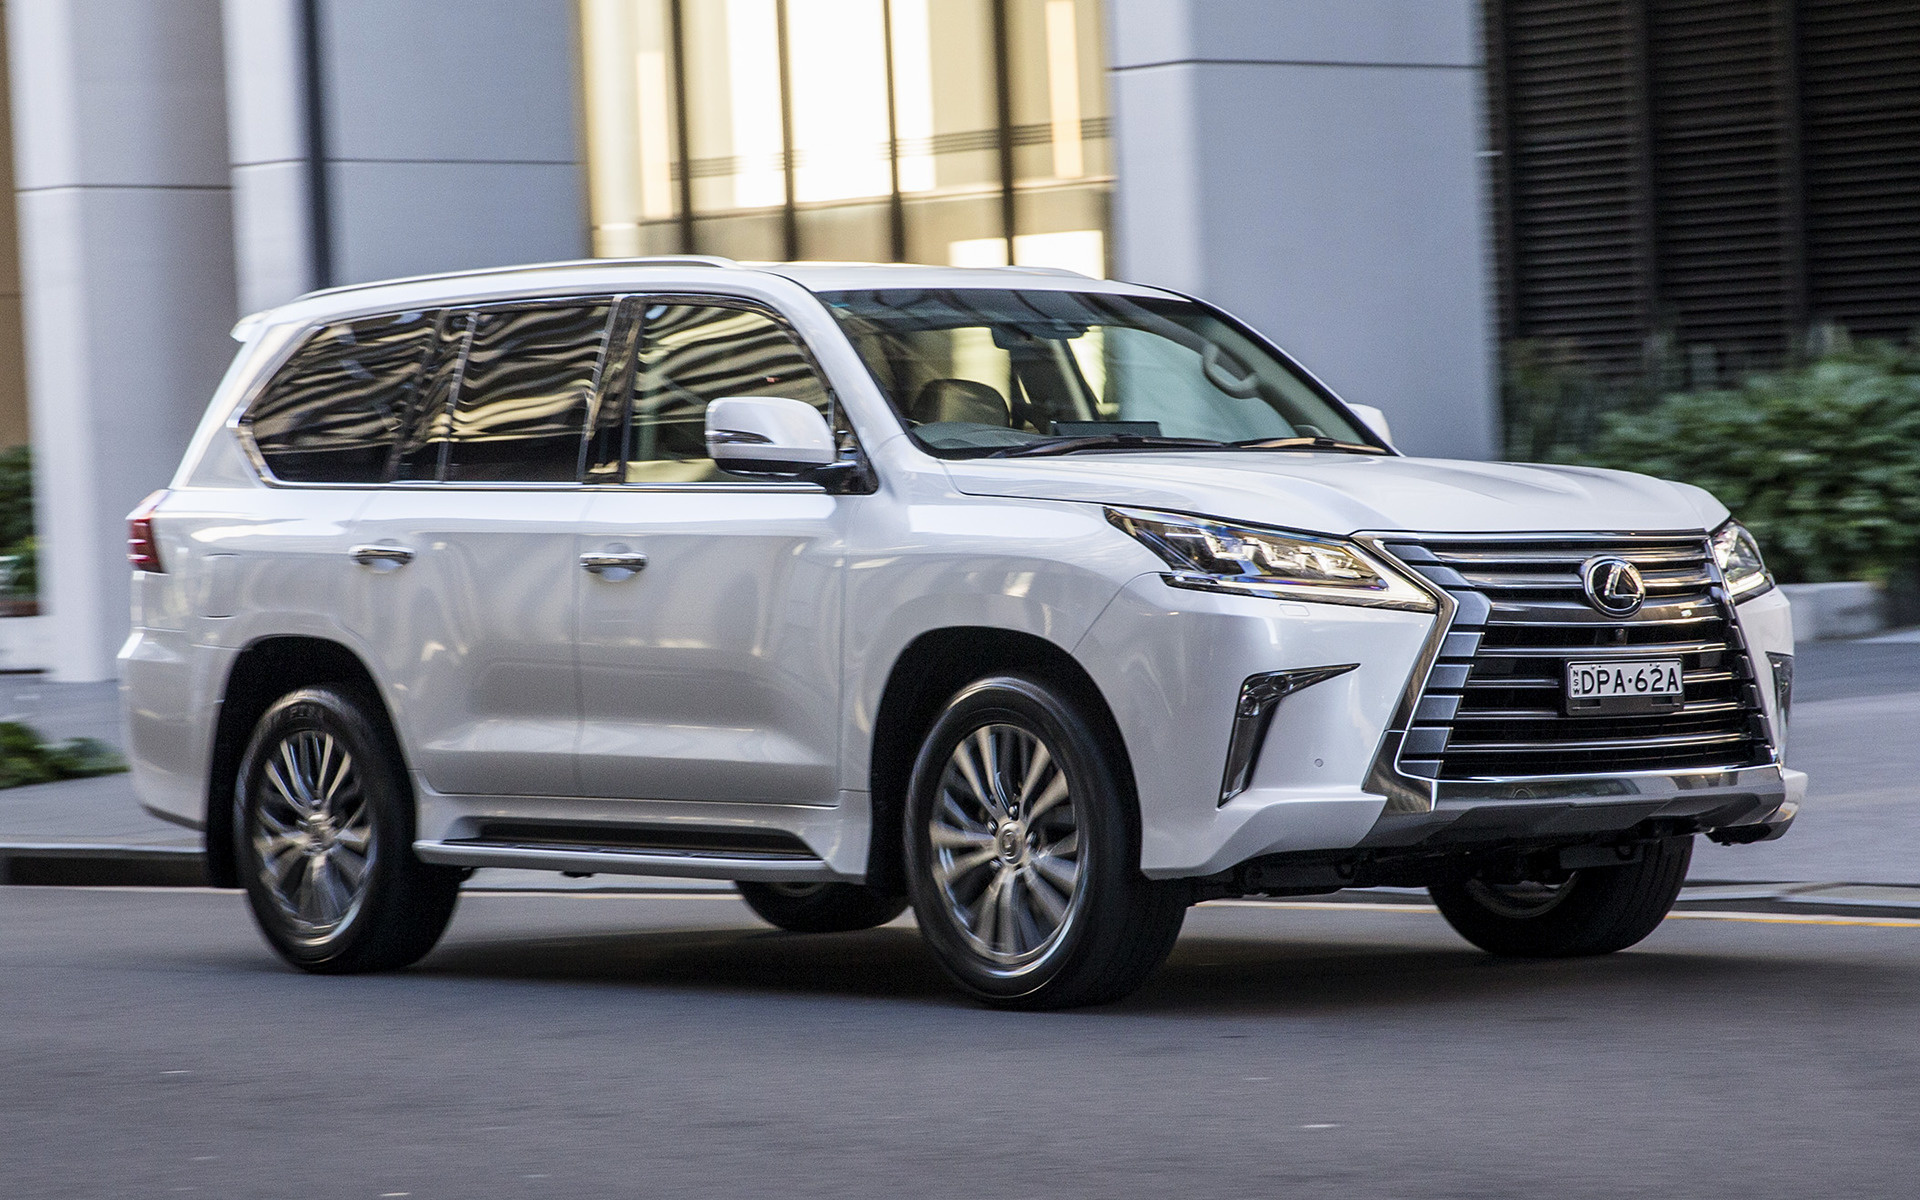 2018 Lexus LX Two-Row (AU) - Wallpapers and HD Images | Car Pixel